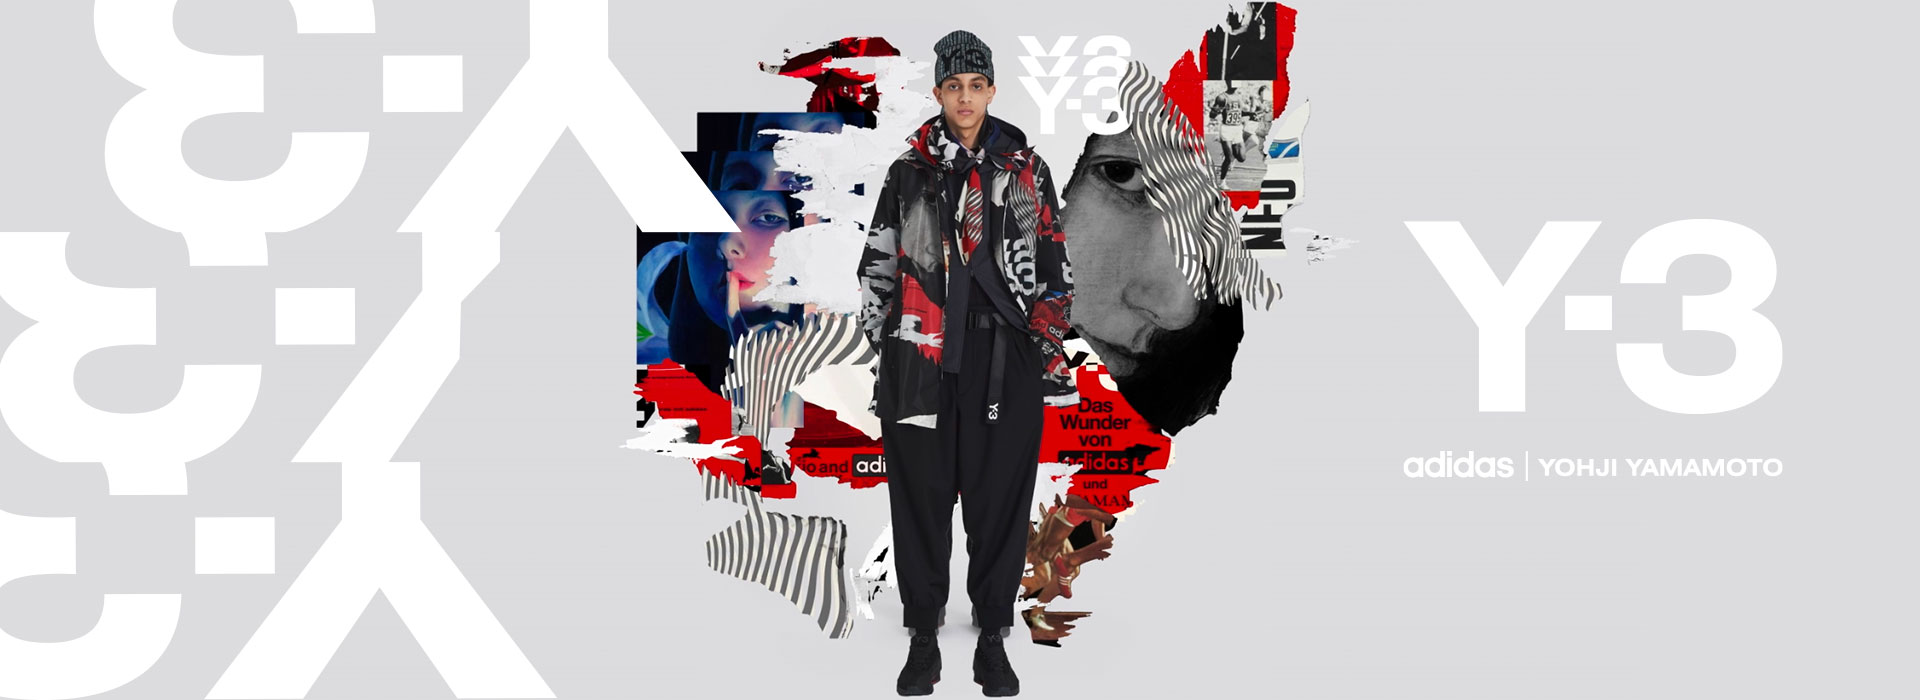 adidas and Yamamoto unveil their latest Collection. - BlackBox Store